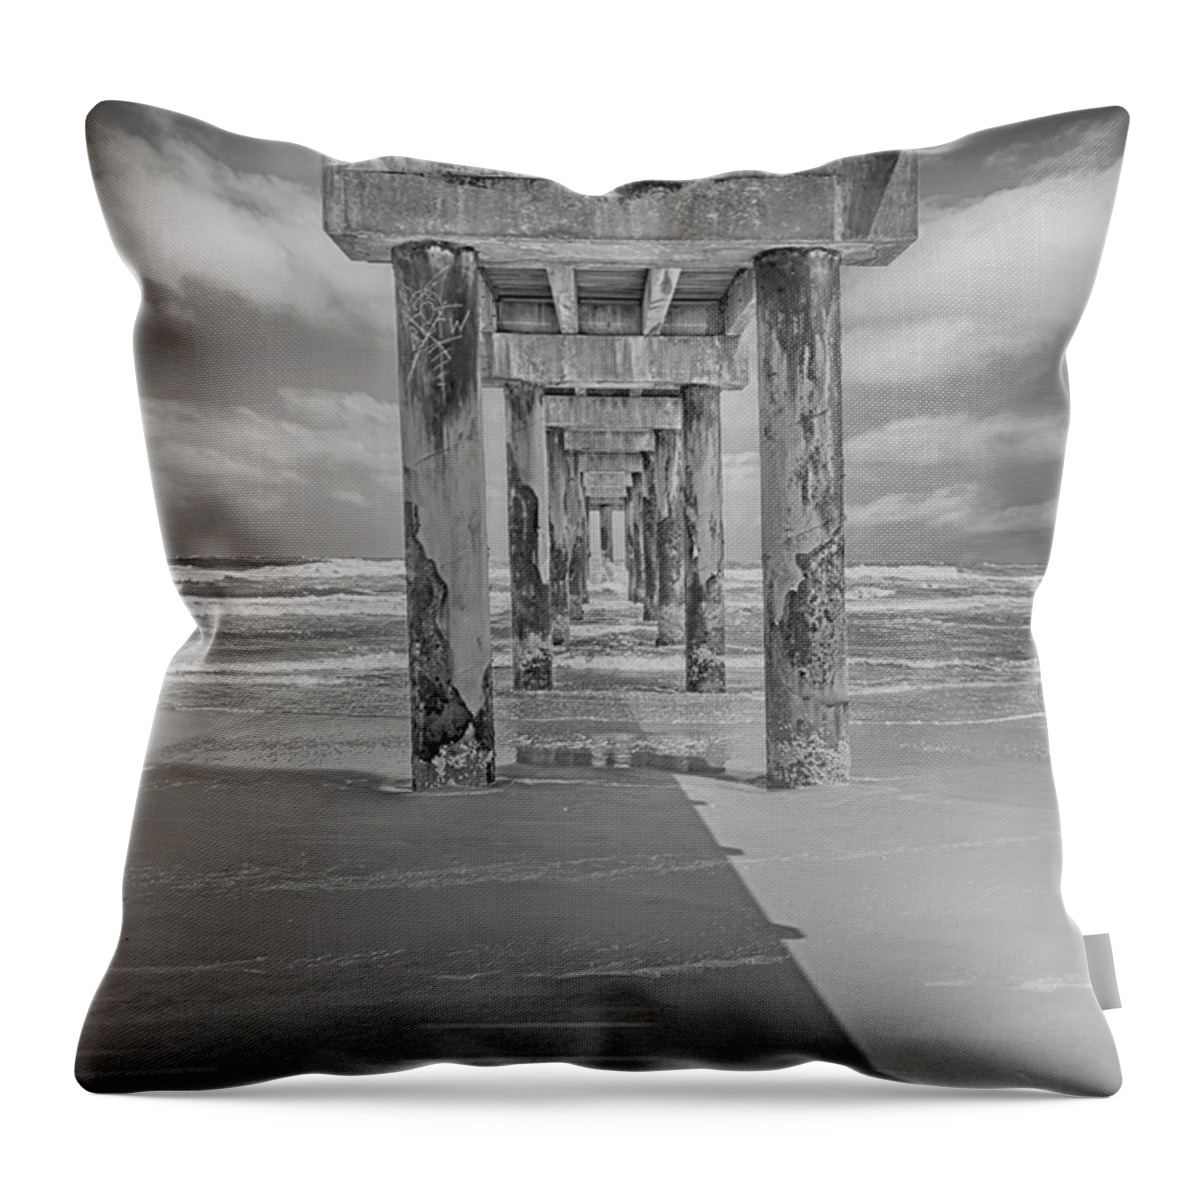 Piers Throw Pillow featuring the photograph St. Augustine Florida Pier by Steven Michael